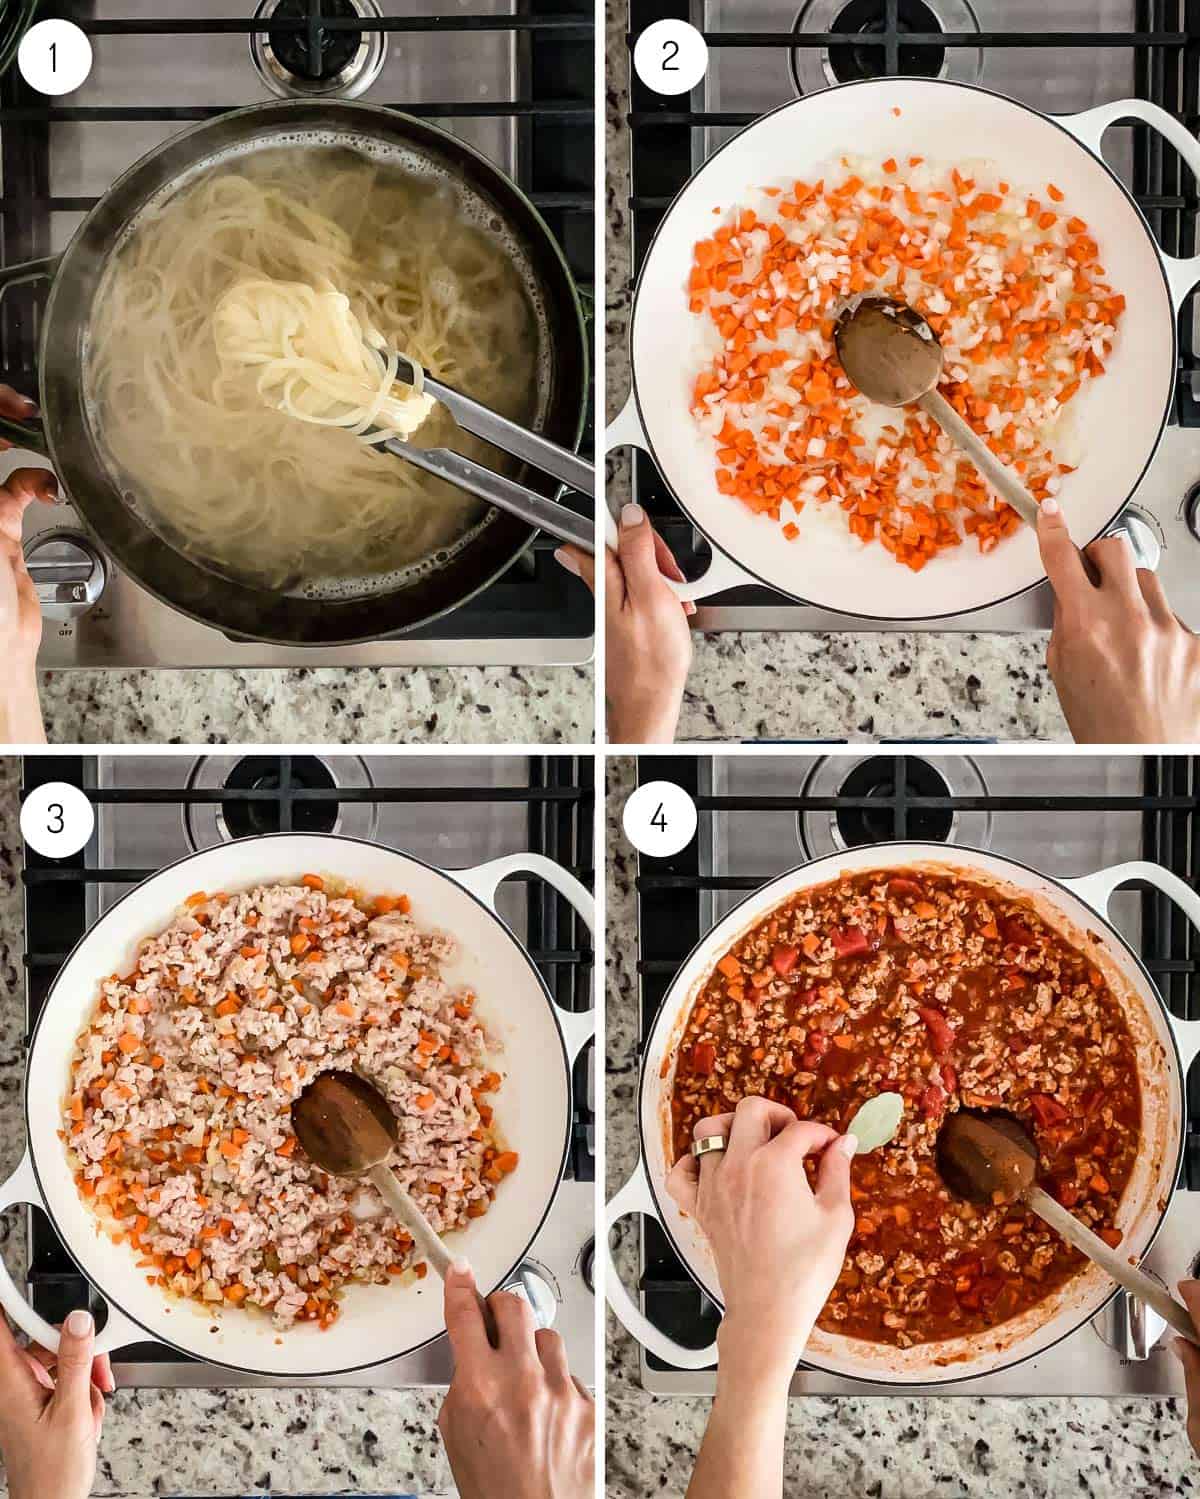 A person cooking pasta and making a meat sauce from the top view.